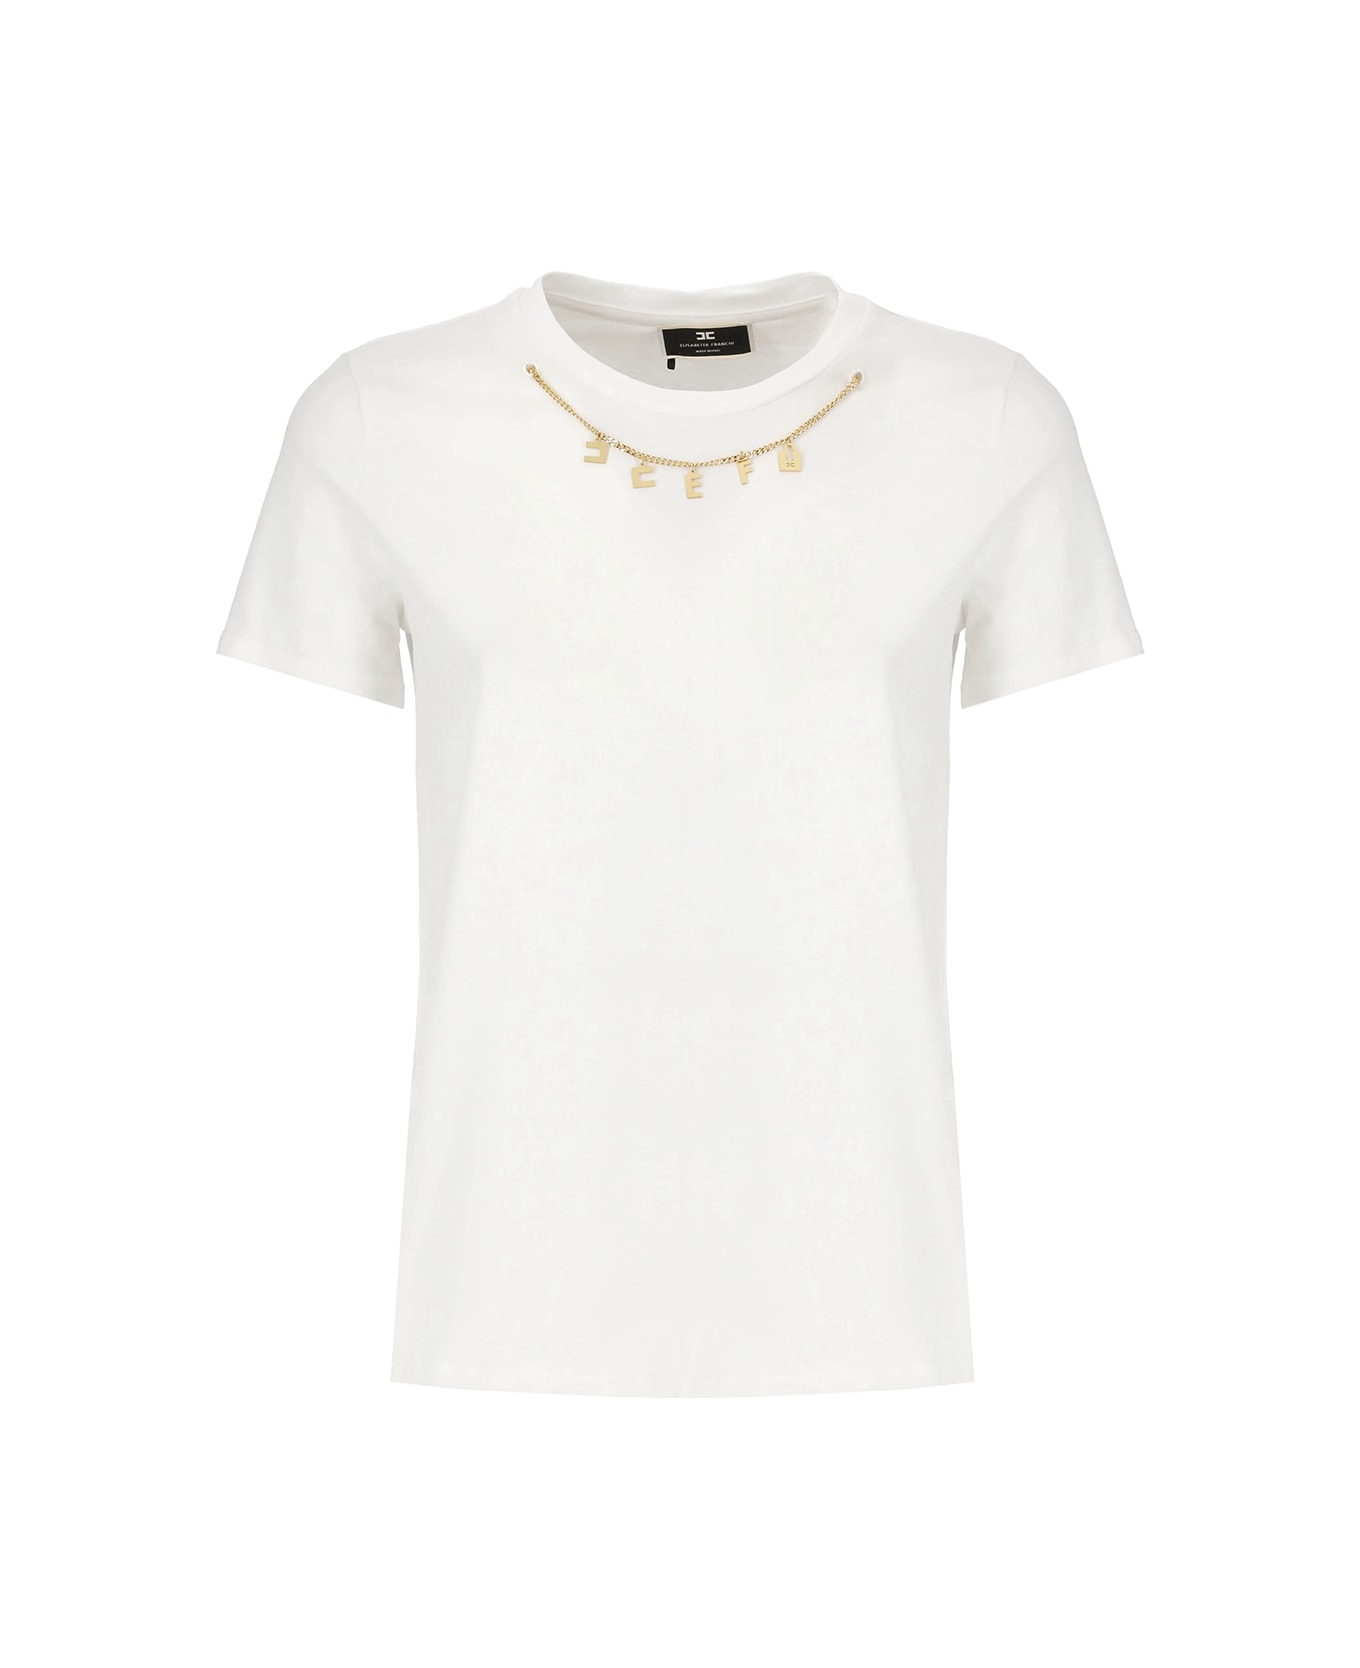 Elisabetta Franchi T-shirt With Charms - White